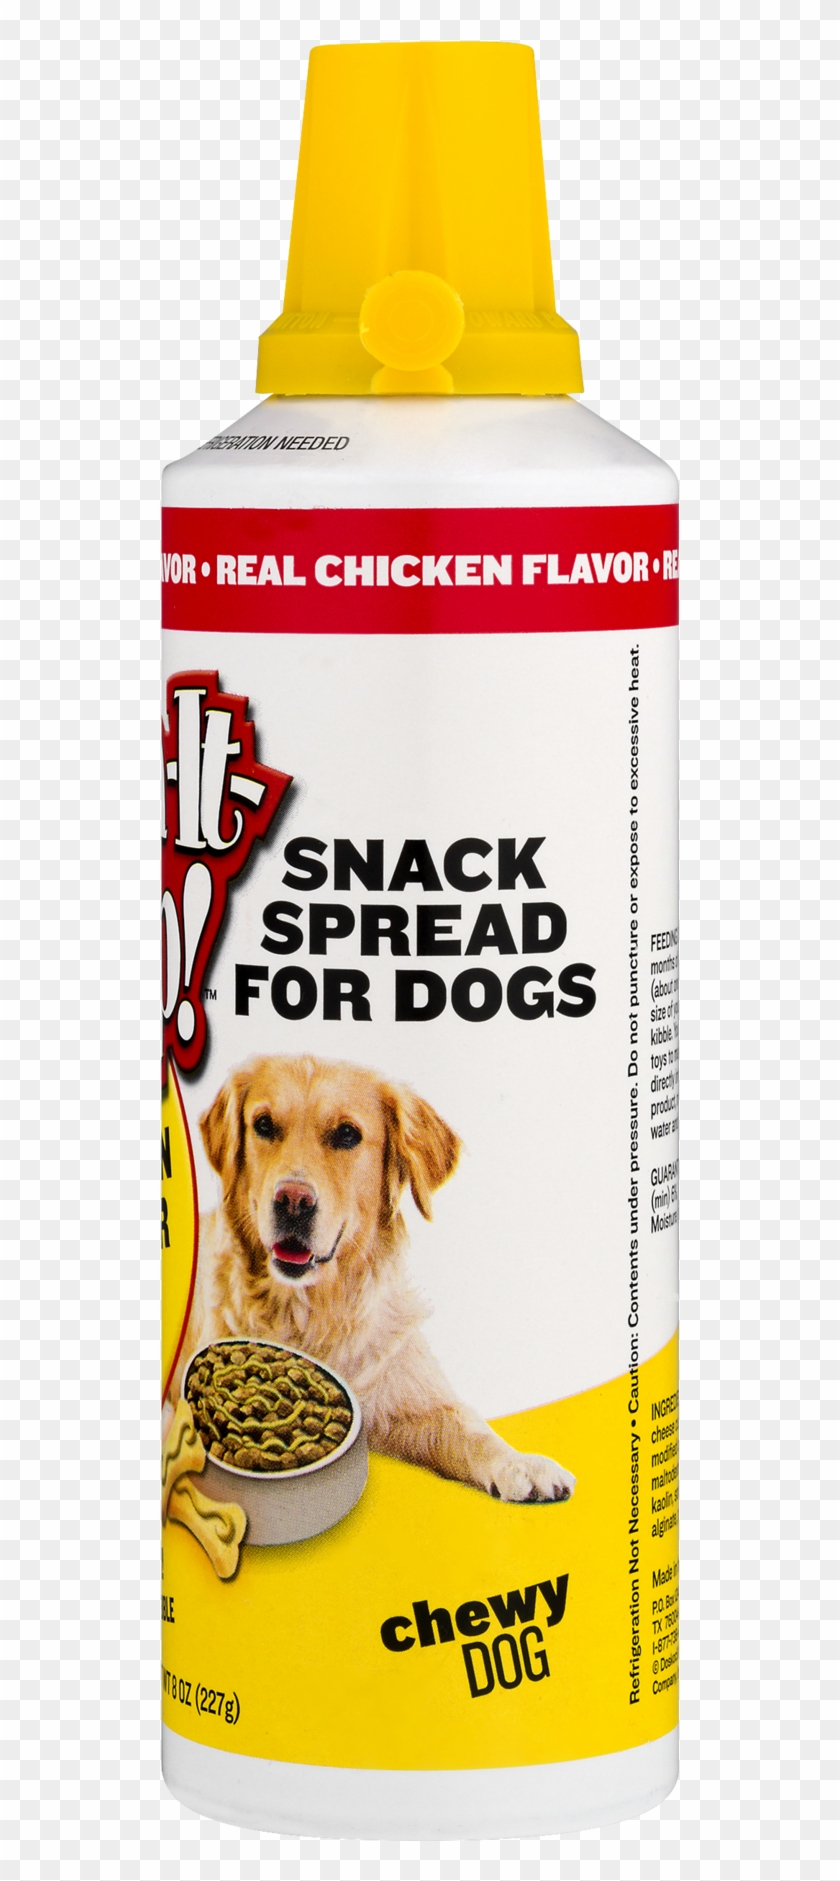 Up Snack Spread For Dogs Chicken Flavor - Companion Dog #1108908